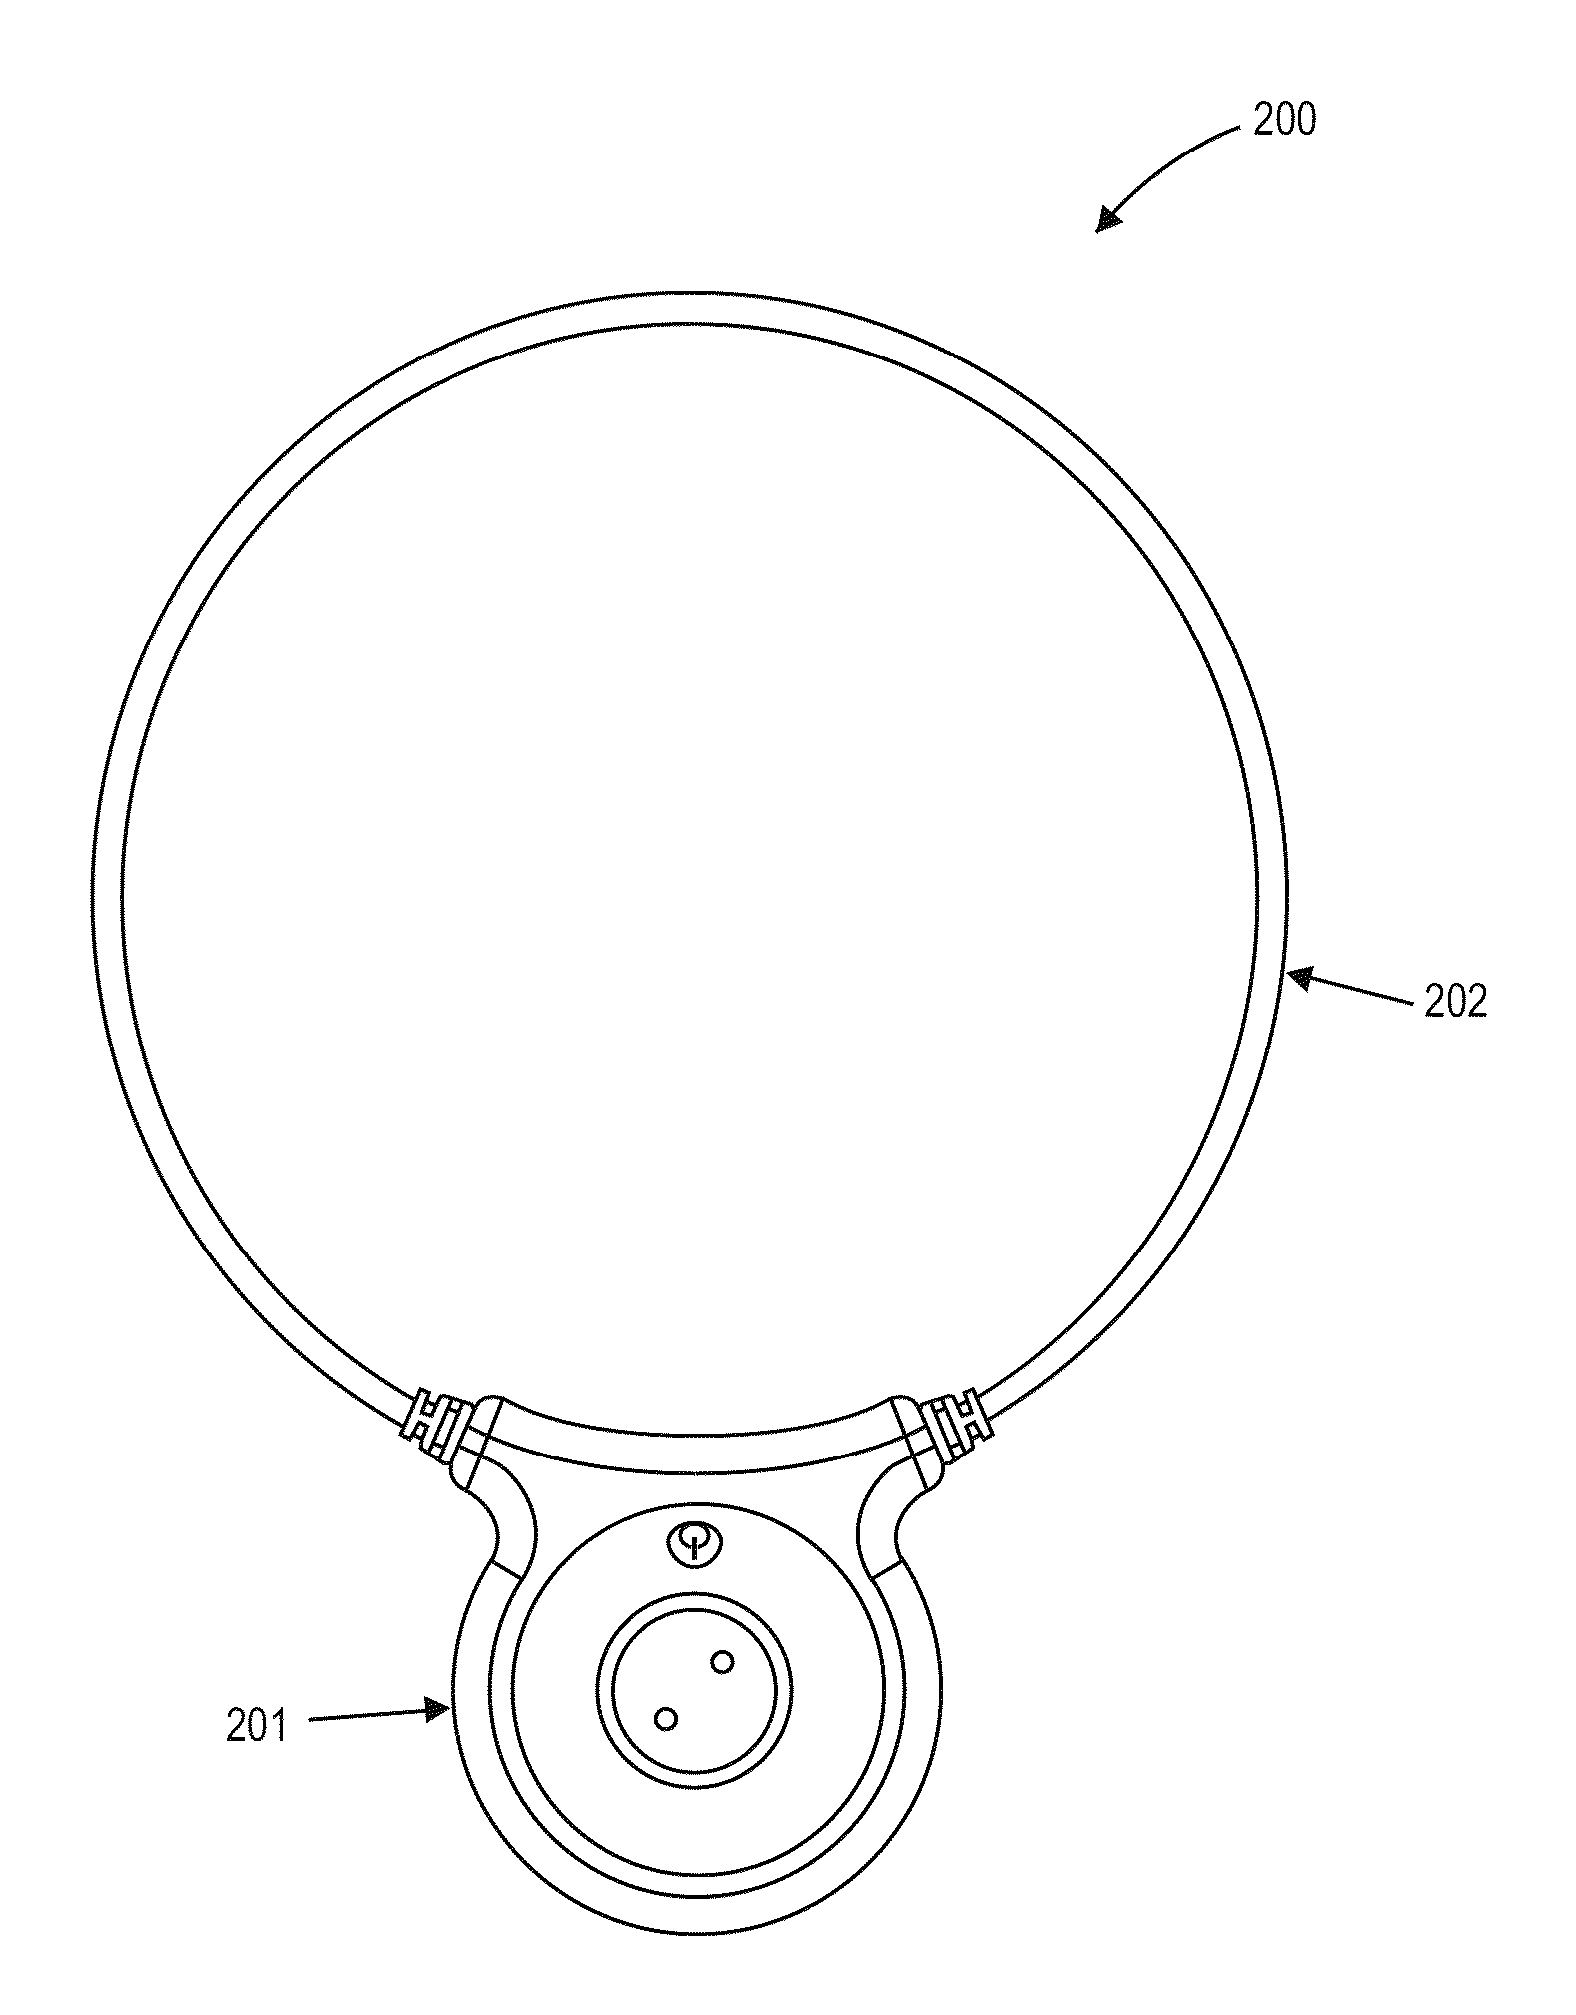 Method and apparatus for electromagnetic treatment of head, cerebral and neural injury in animals and humans